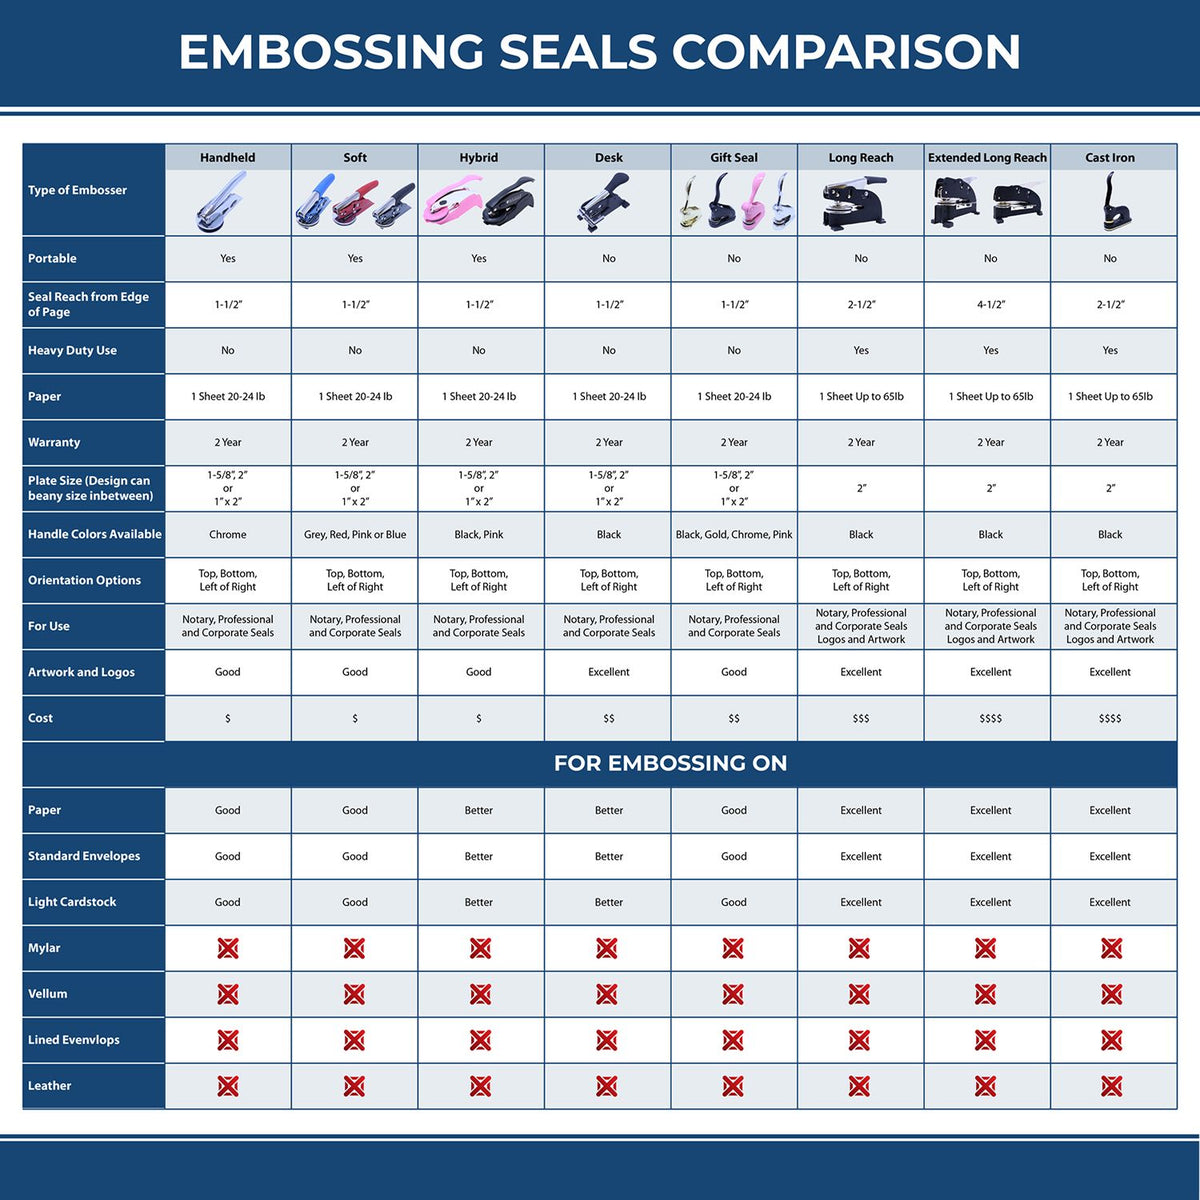 A comparison chart for the different types of mount models available for the Hybrid West Virginia Land Surveyor Seal